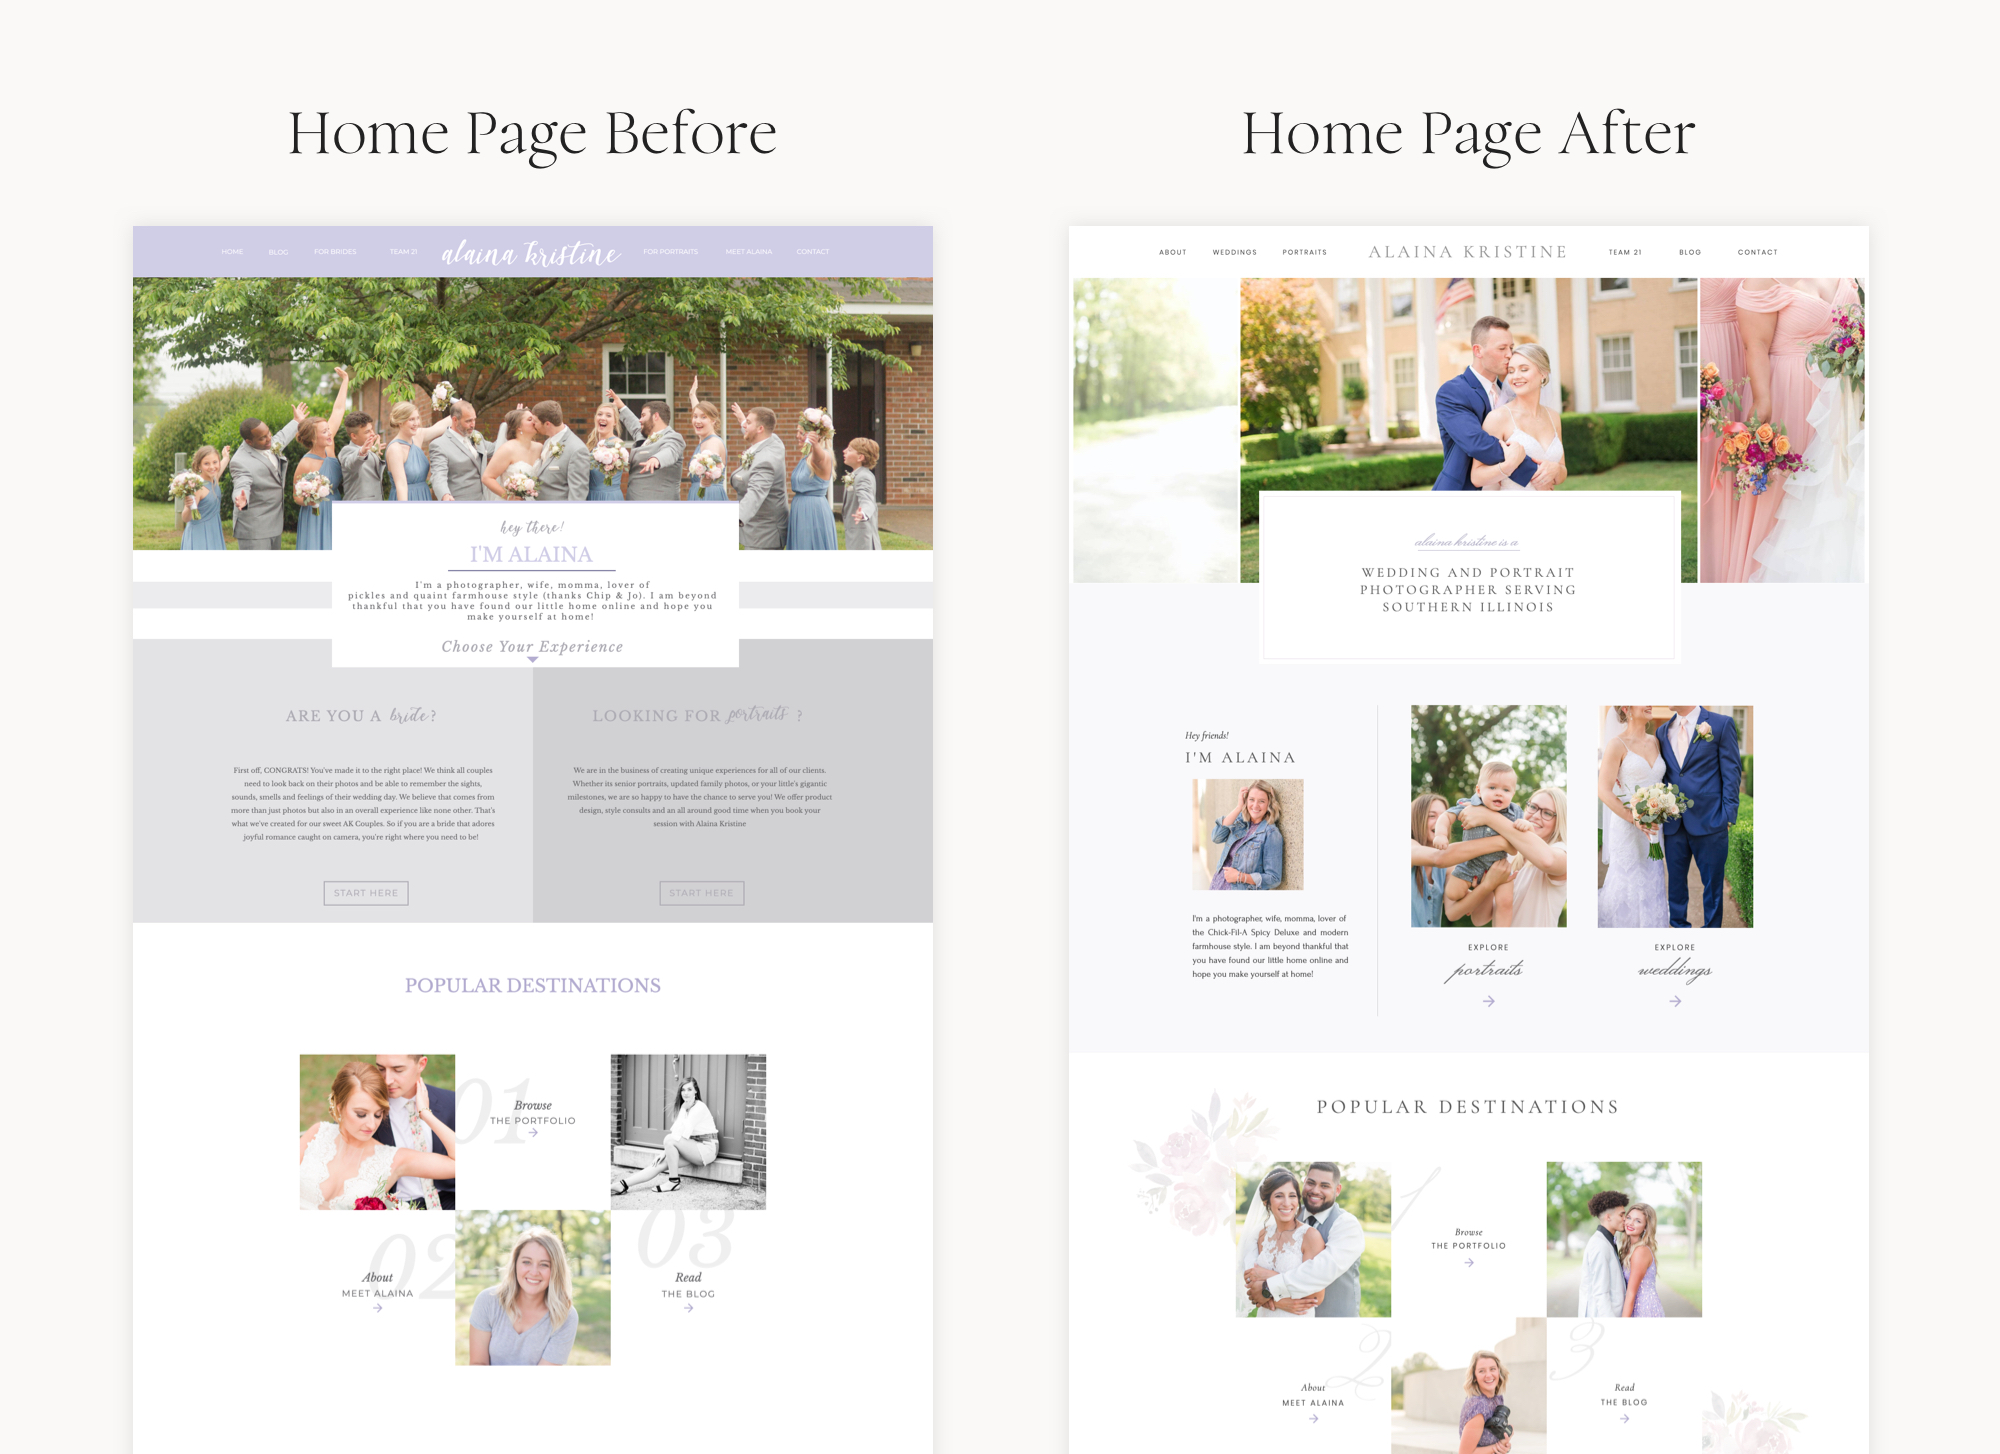 Home page before and after